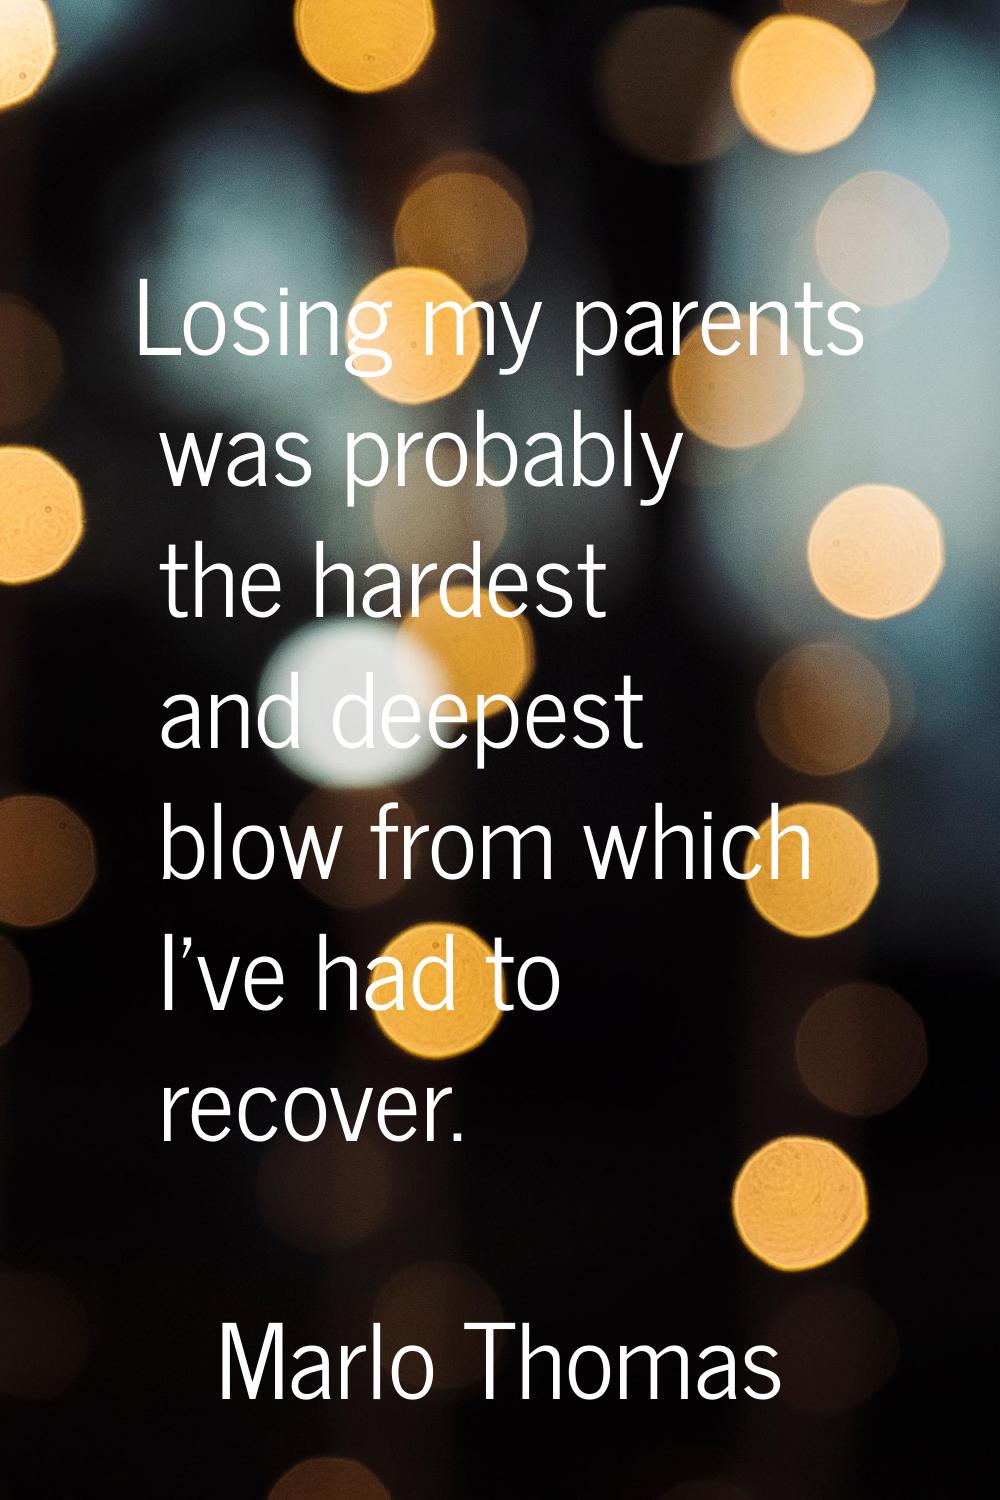 Losing my parents was probably the hardest and deepest blow from which I've had to recover.